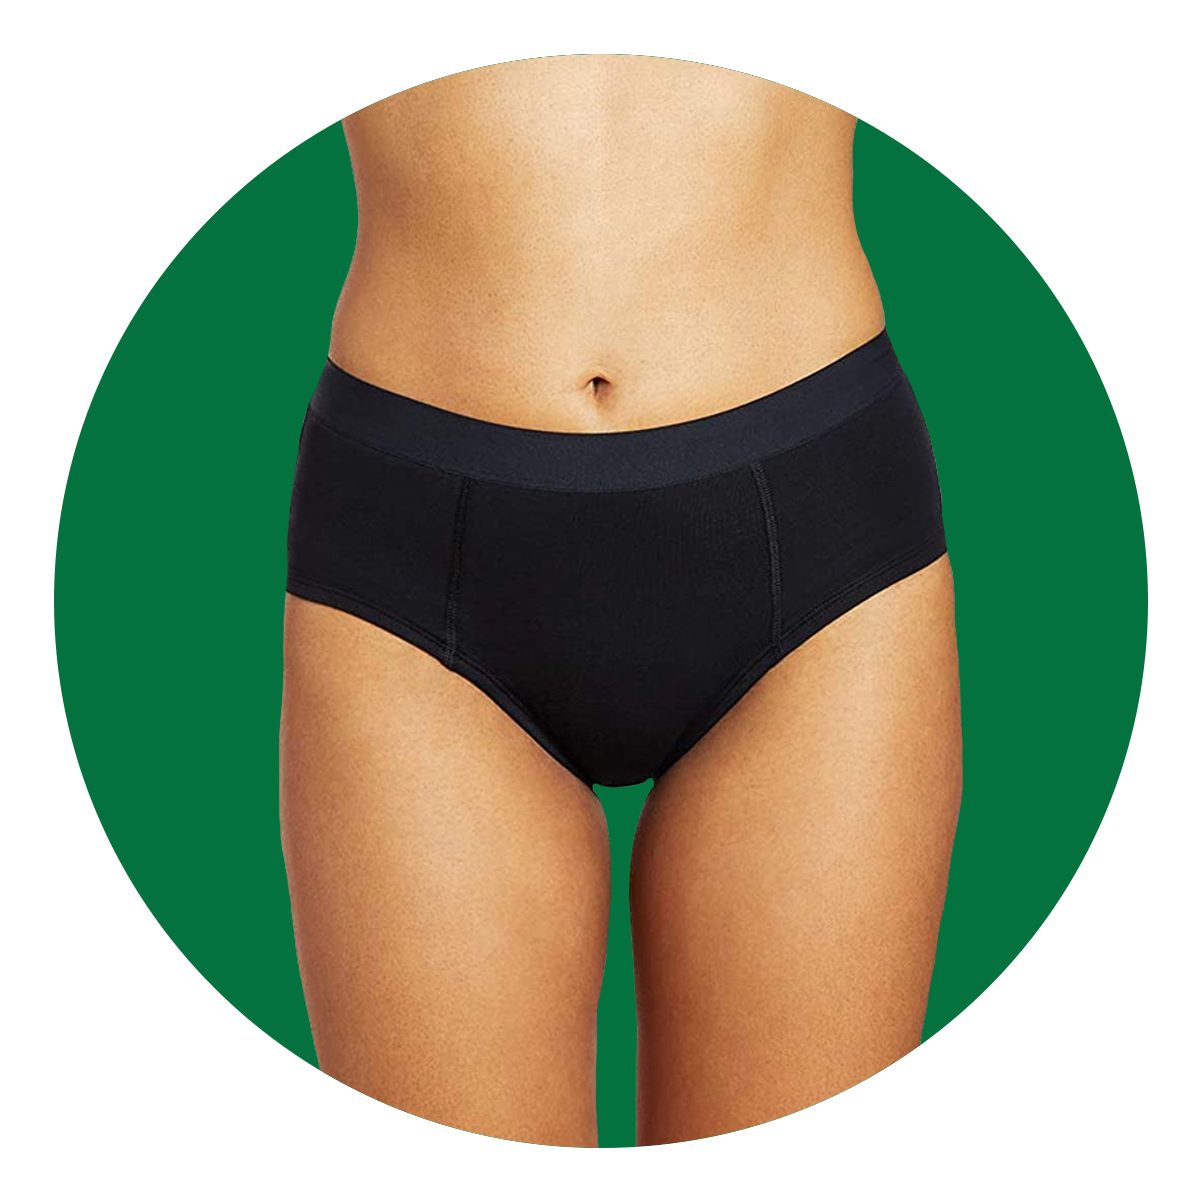 Why is bamboo underwear better for your vagina than cotton